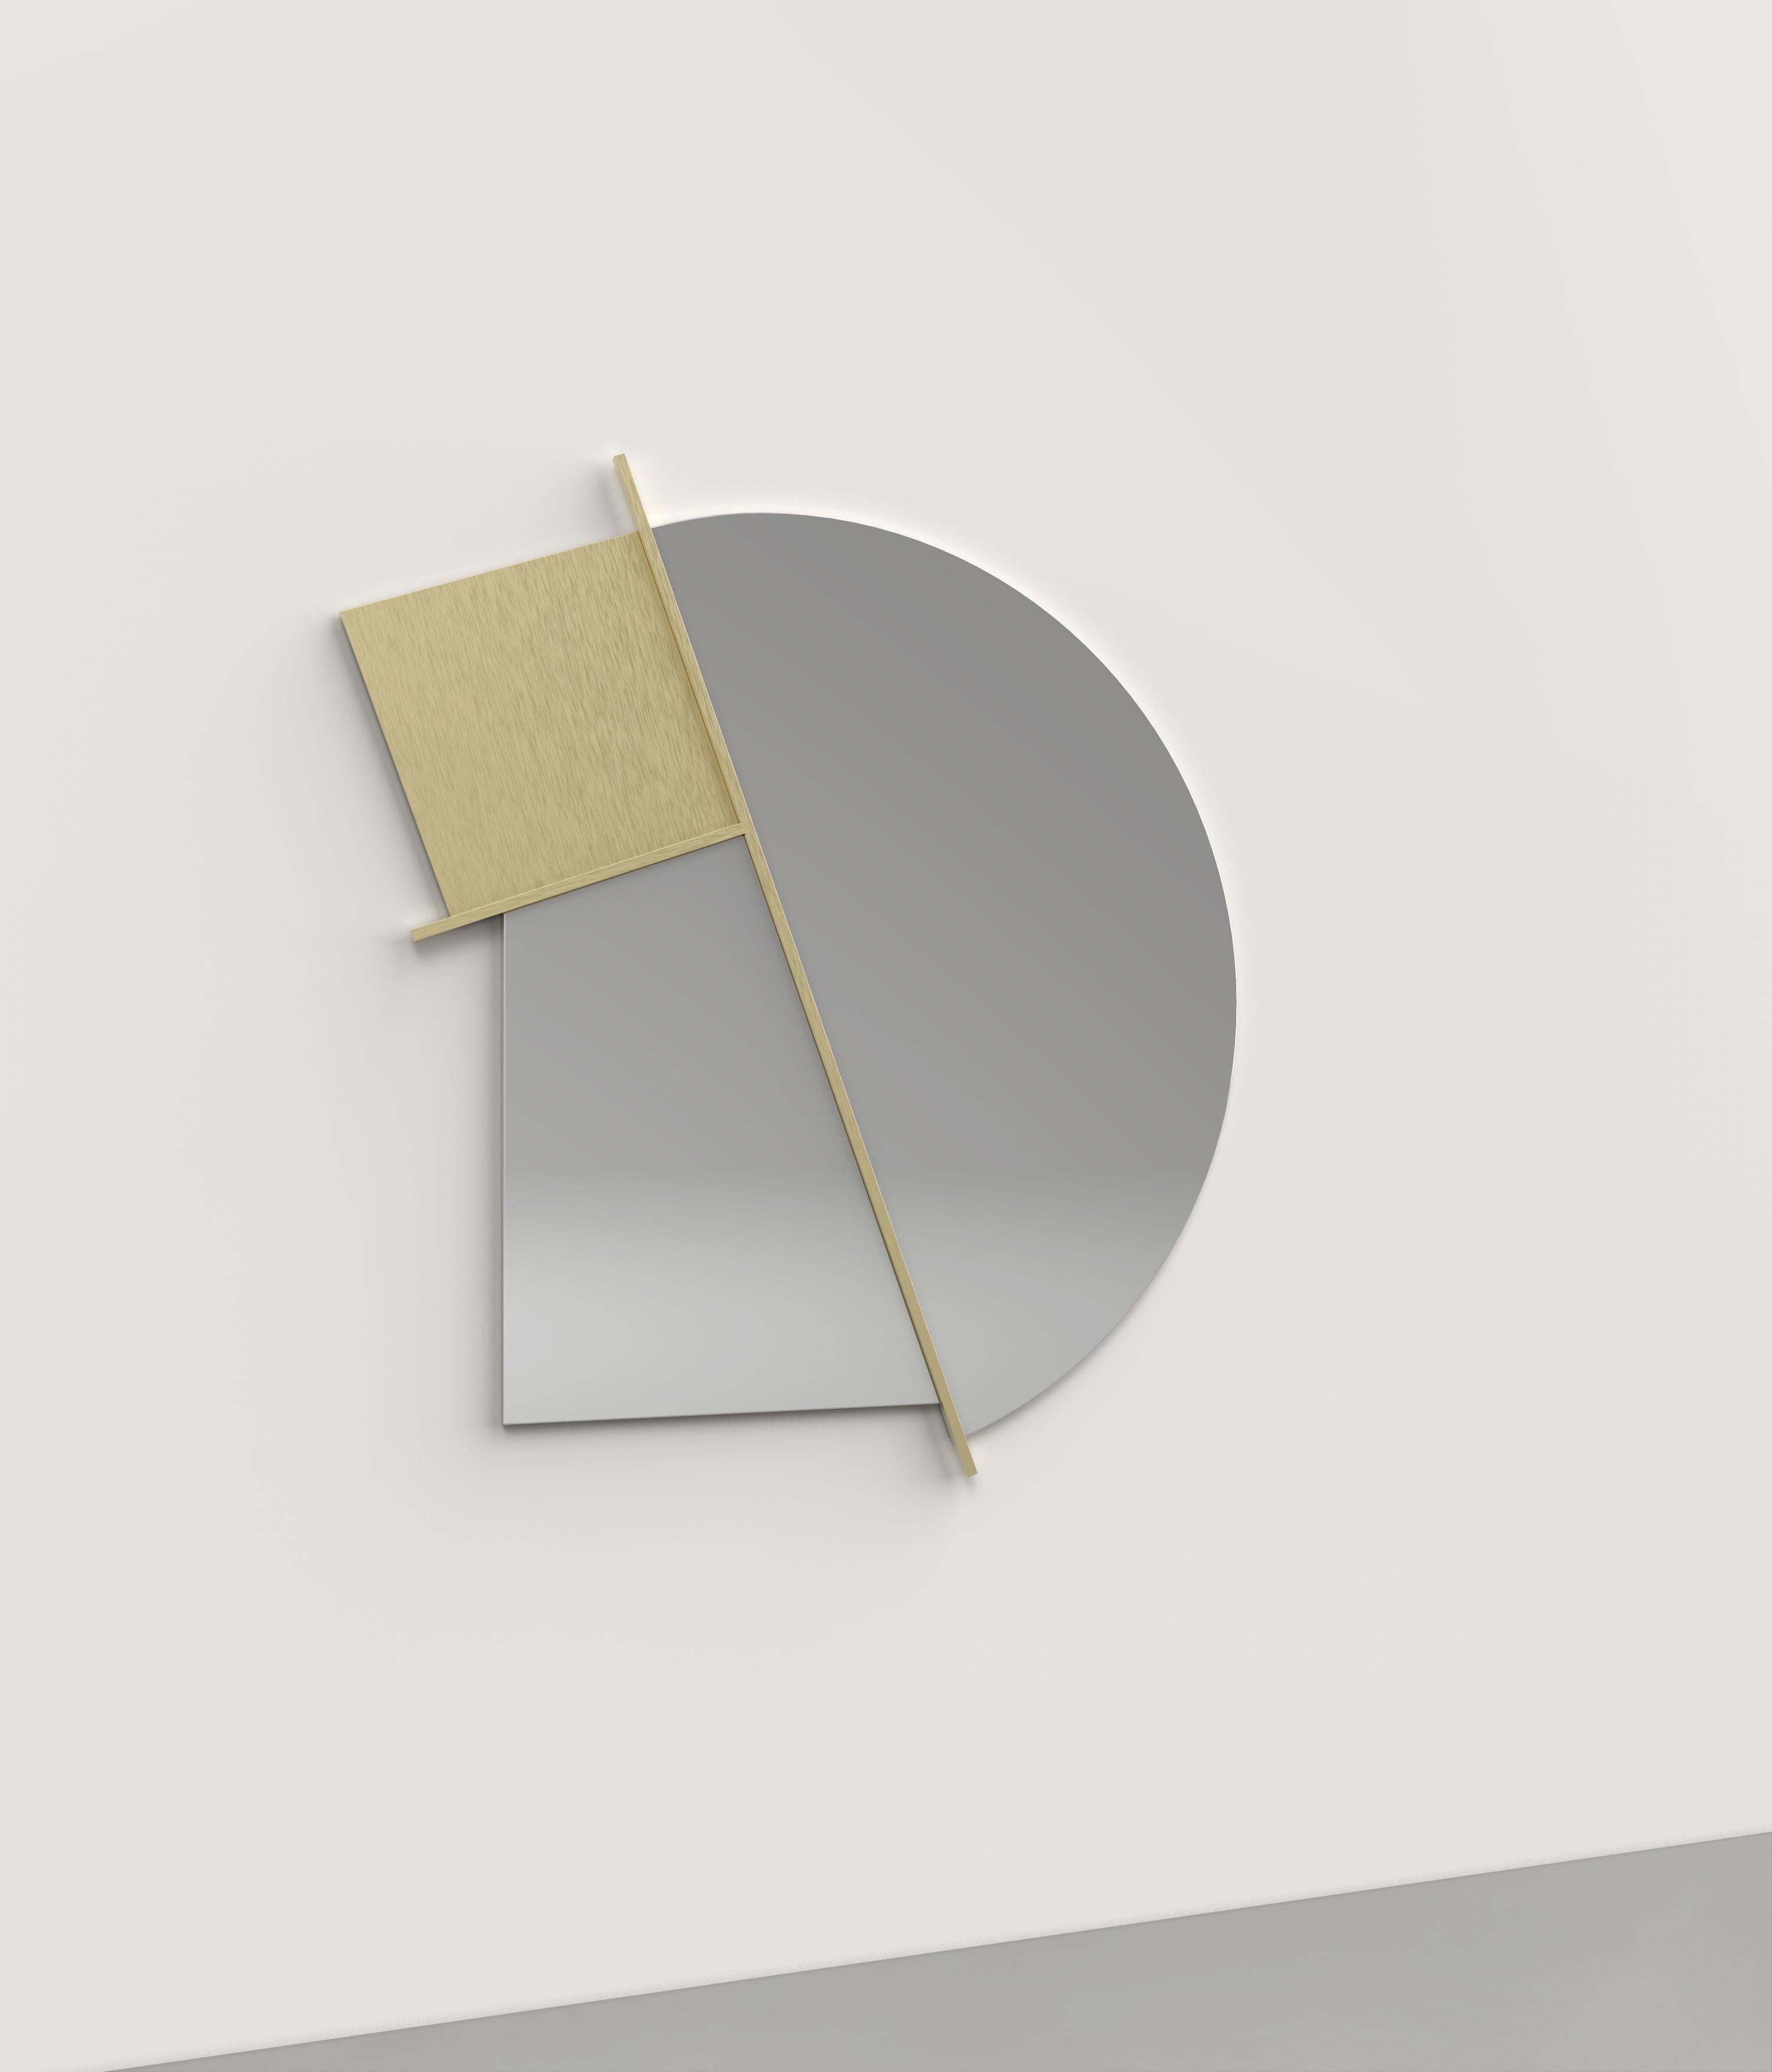 Nova V1 wall mirror by Edizione Limitata
Limited edition of 1000 pieces. Signed and numbered.
Dimensions: D83 x W4 x H89 cm
Materials: brass+ classic finish mirror

Nova is a collection of contemporary mirrors made by Italian artisans in